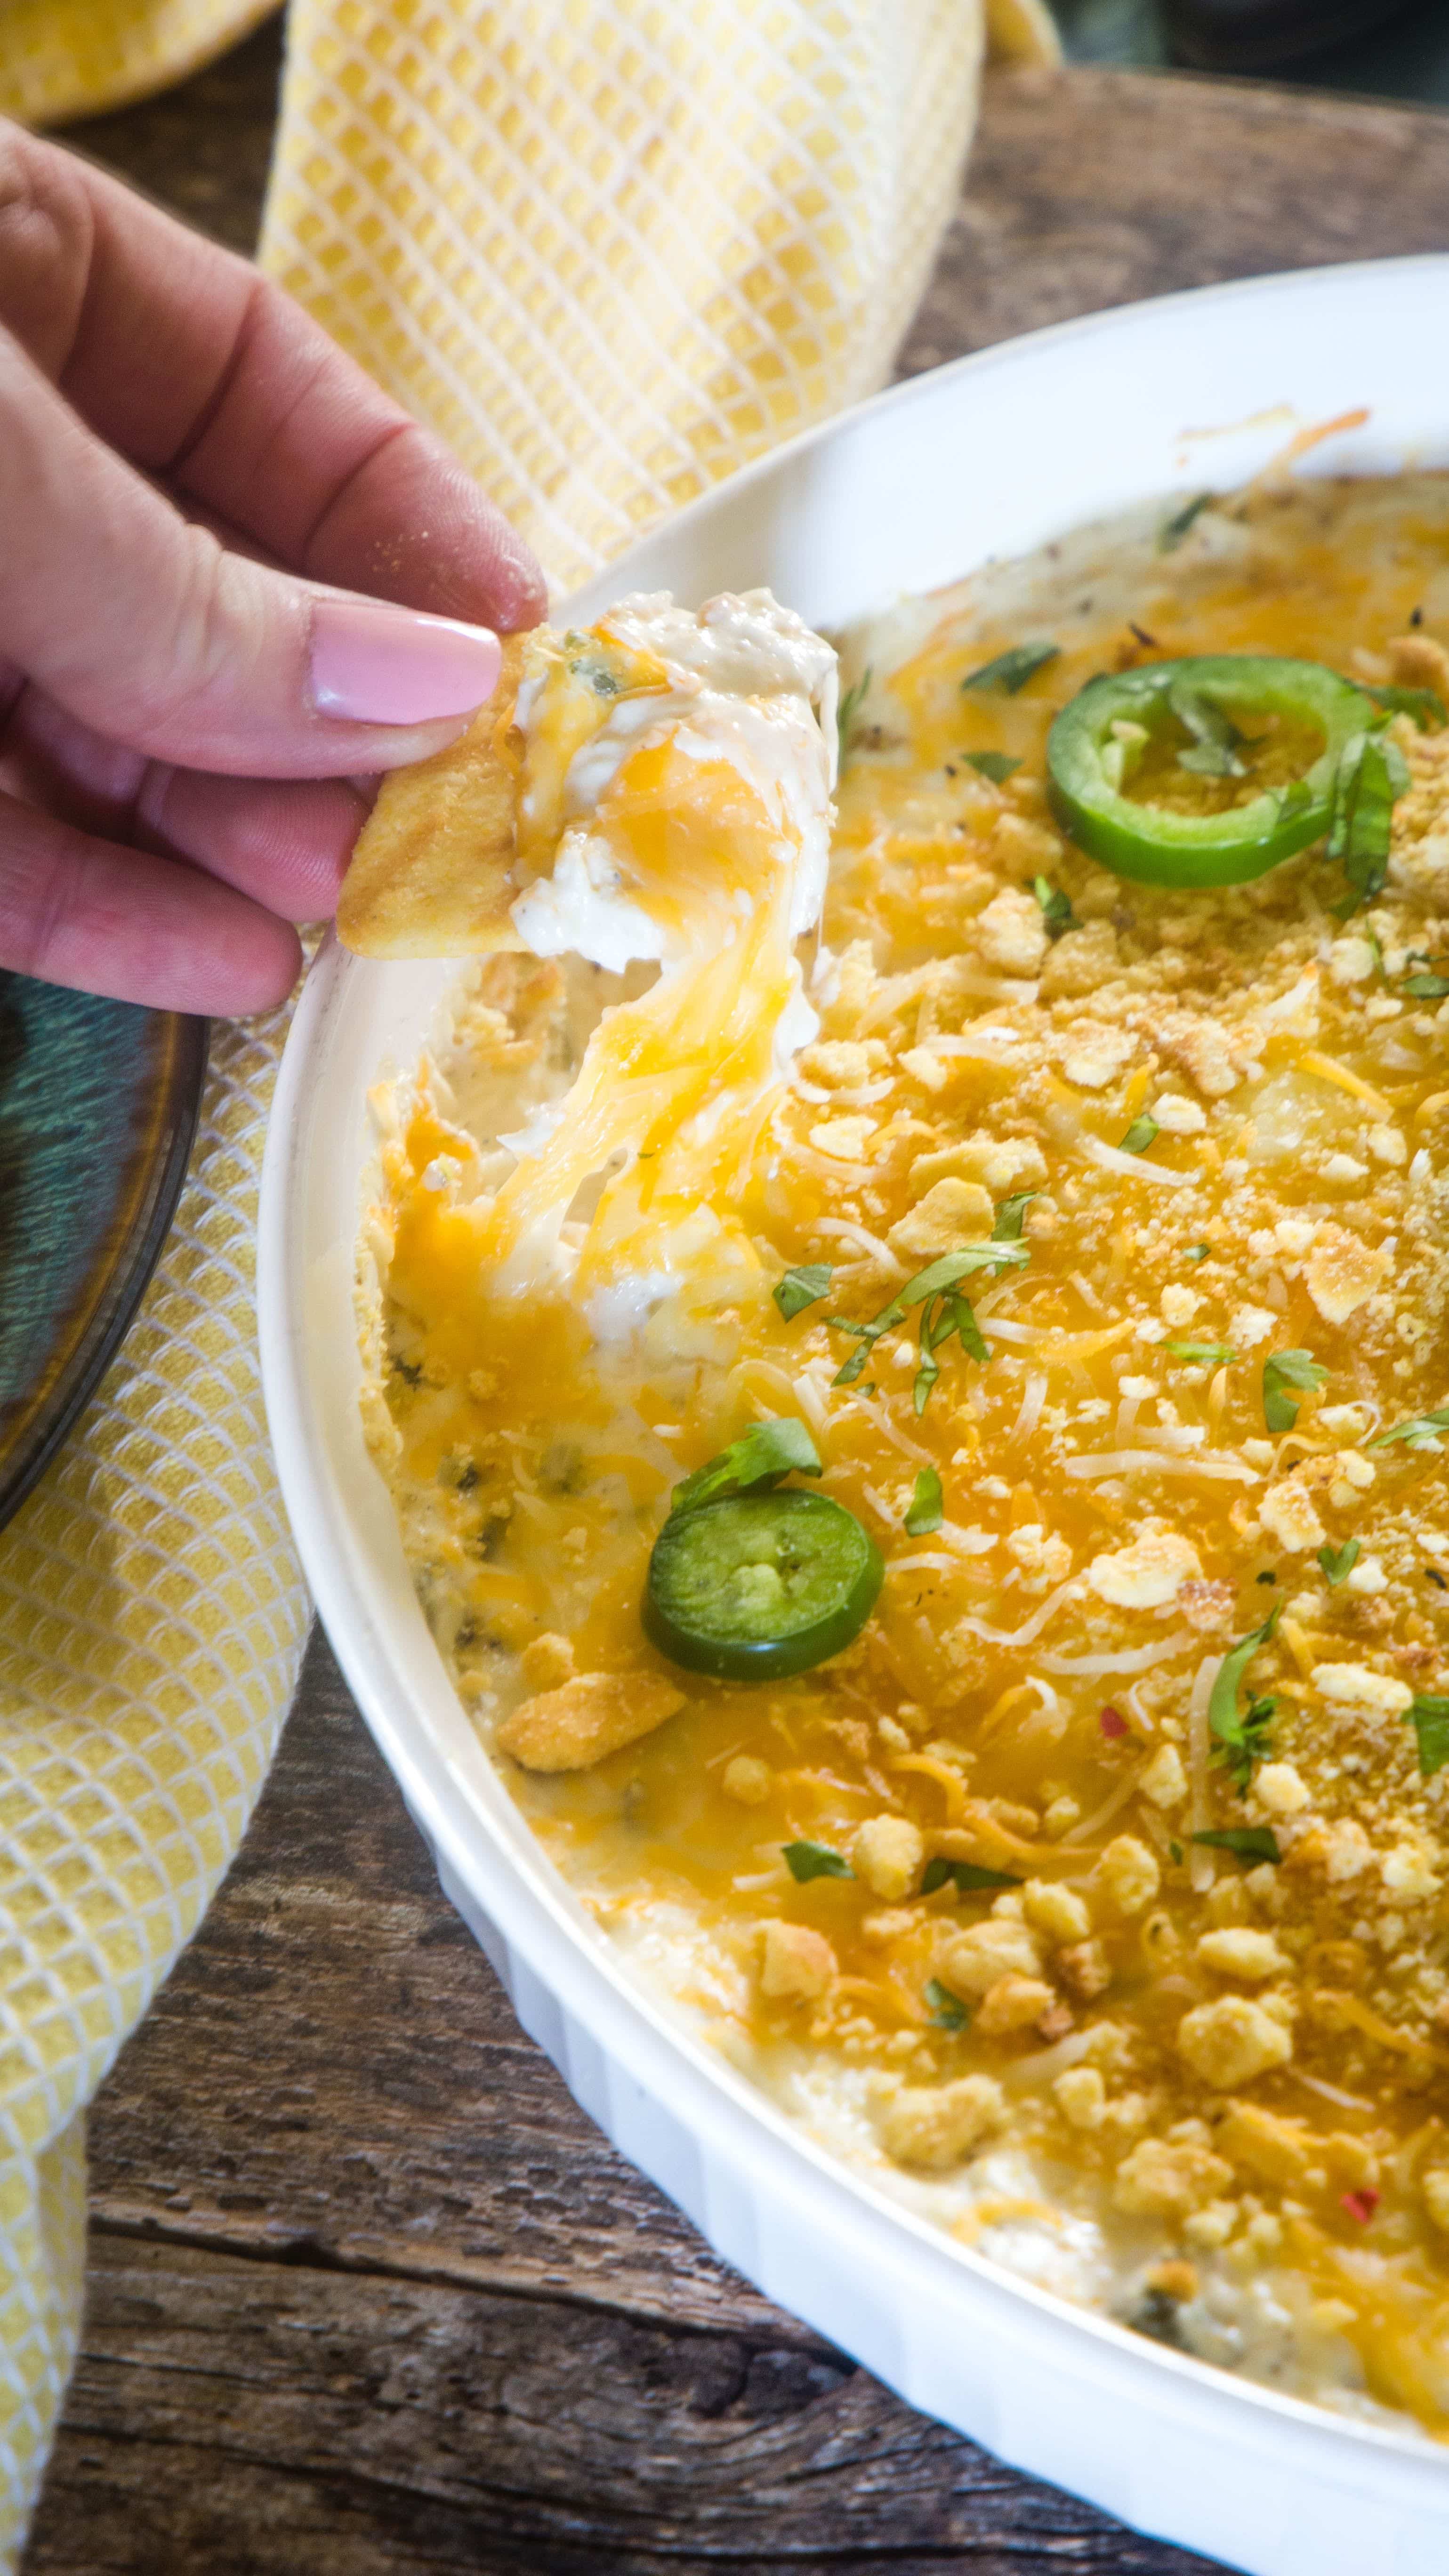 warm jalapeno popper dip topped with cheese and jalapeno with a cracker dipped into the dip